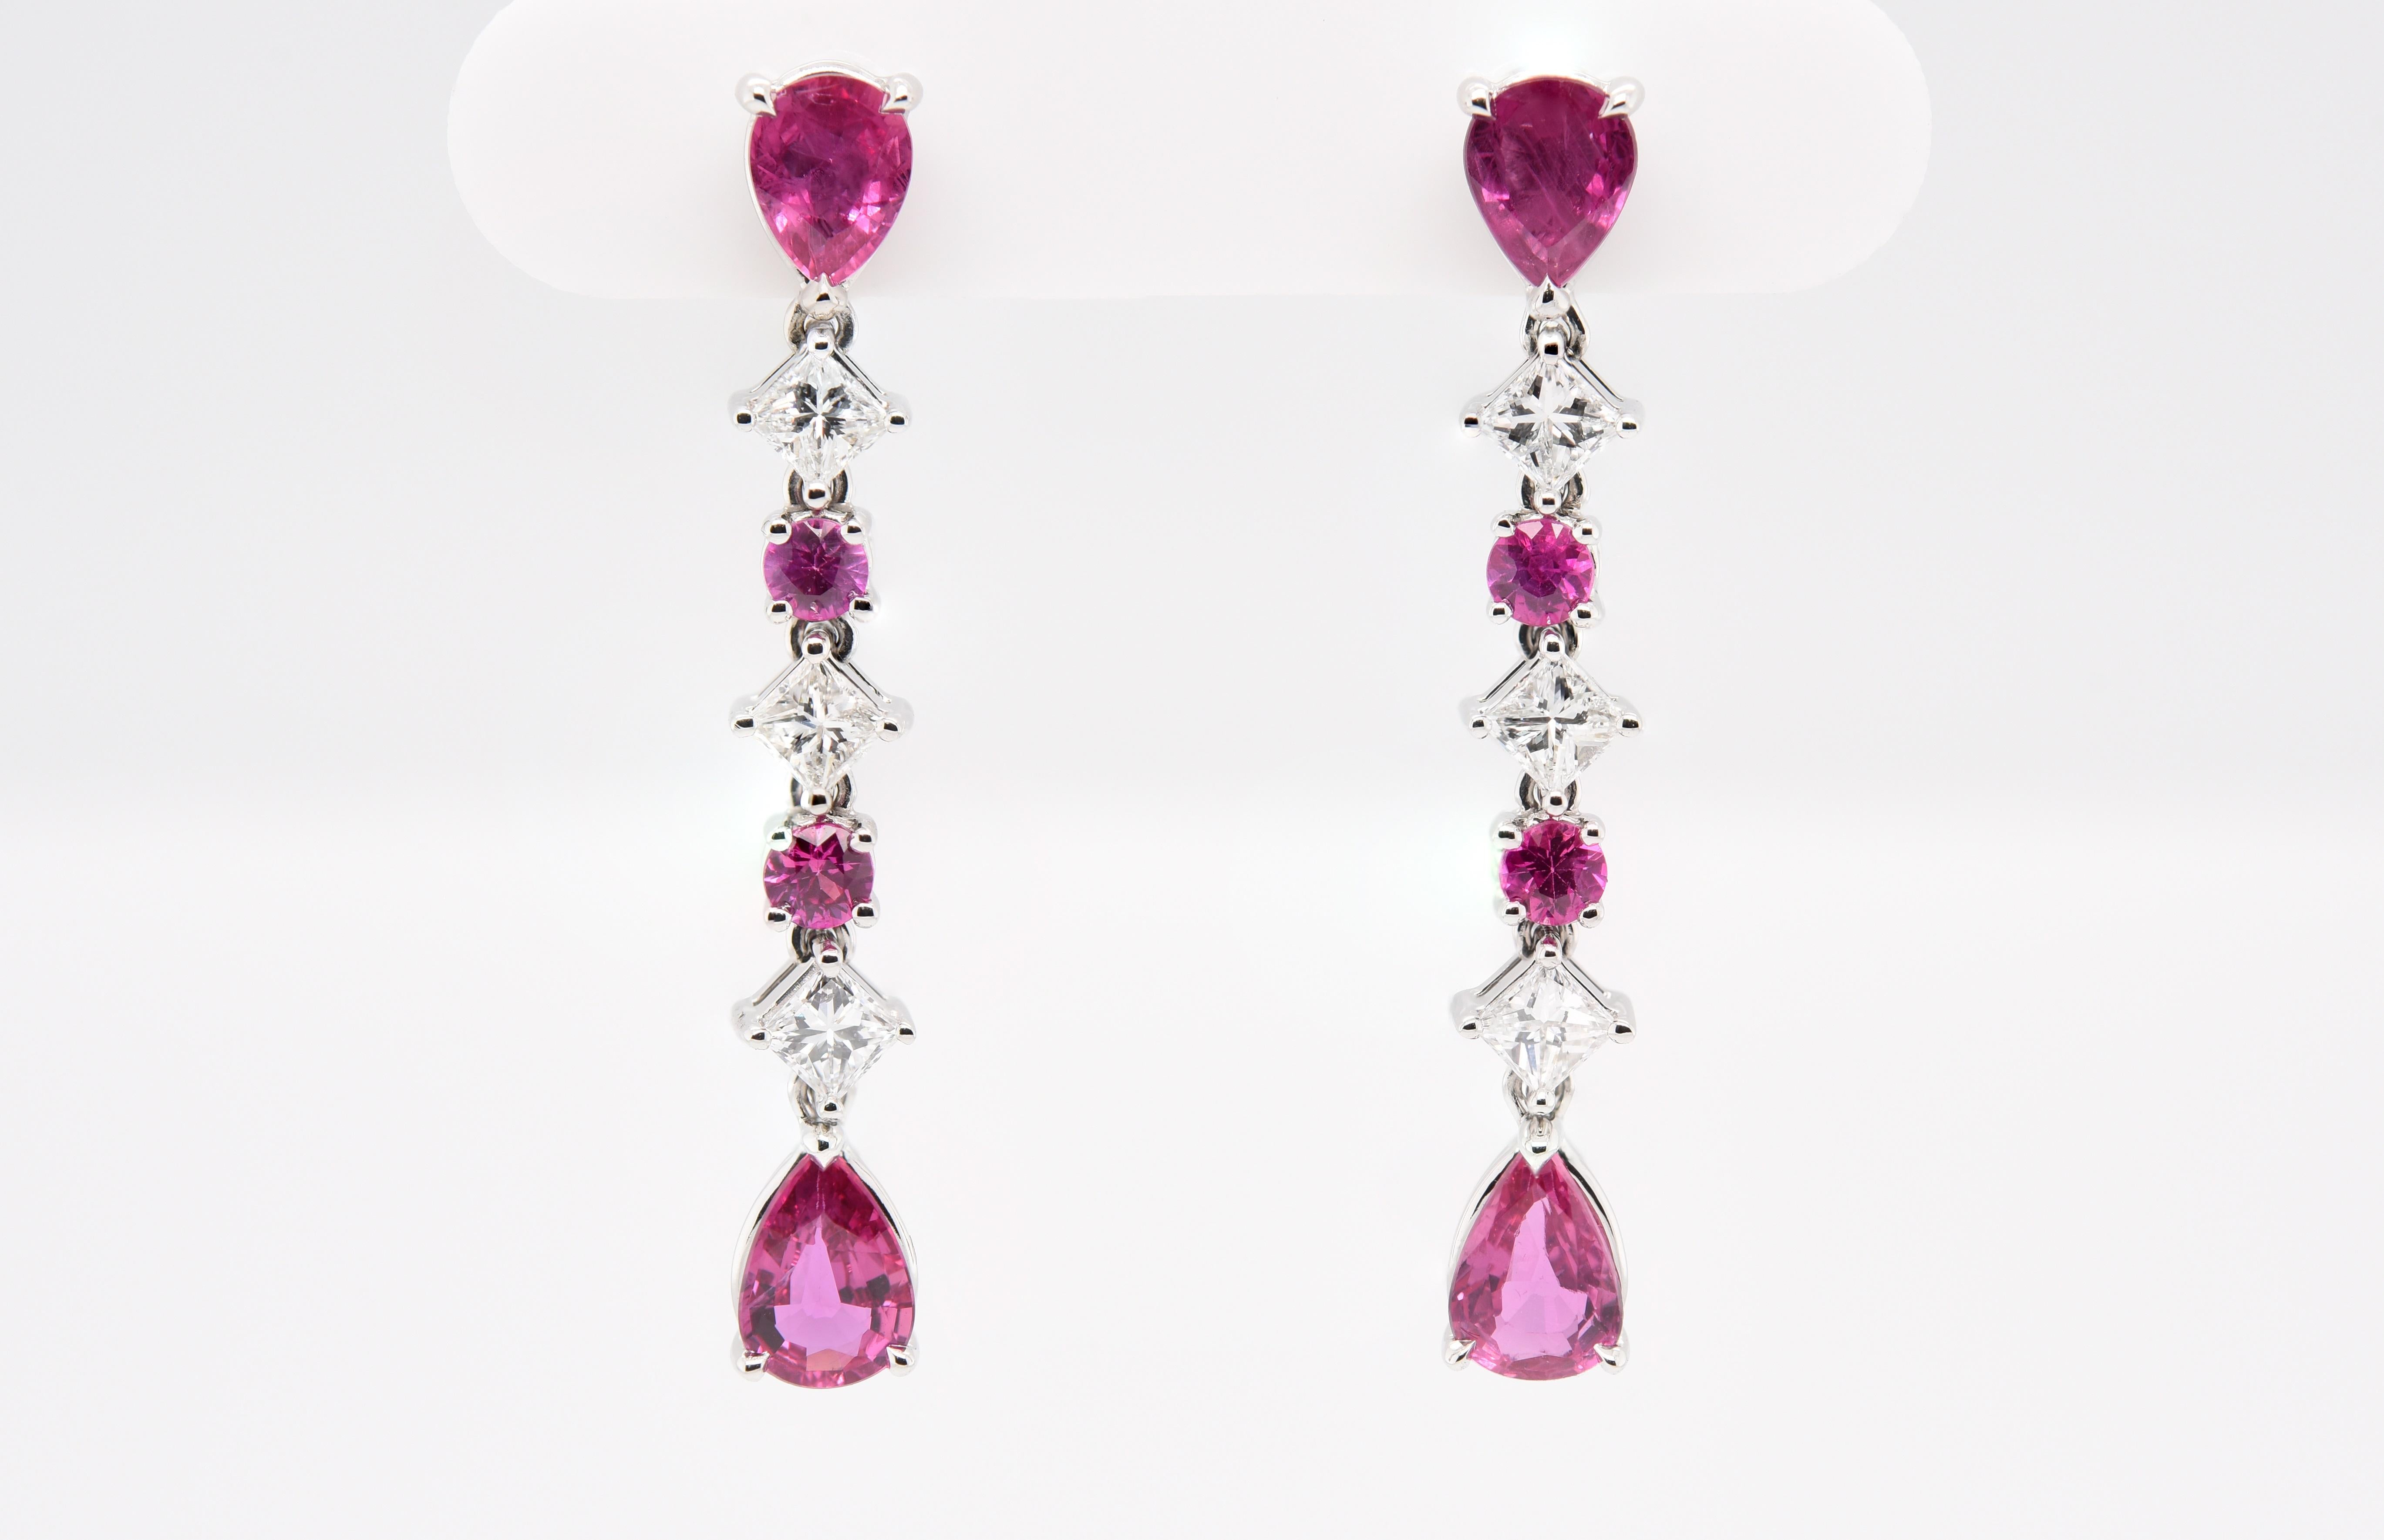 A beautiful alternating pattern of rubies and diamonds. There are four pear shaped Rubies along with four round Rubies for a total gem weight of 1.85 carats with four square (Princess Shape) Diamonds weighing over .50 carats for a total gem weight